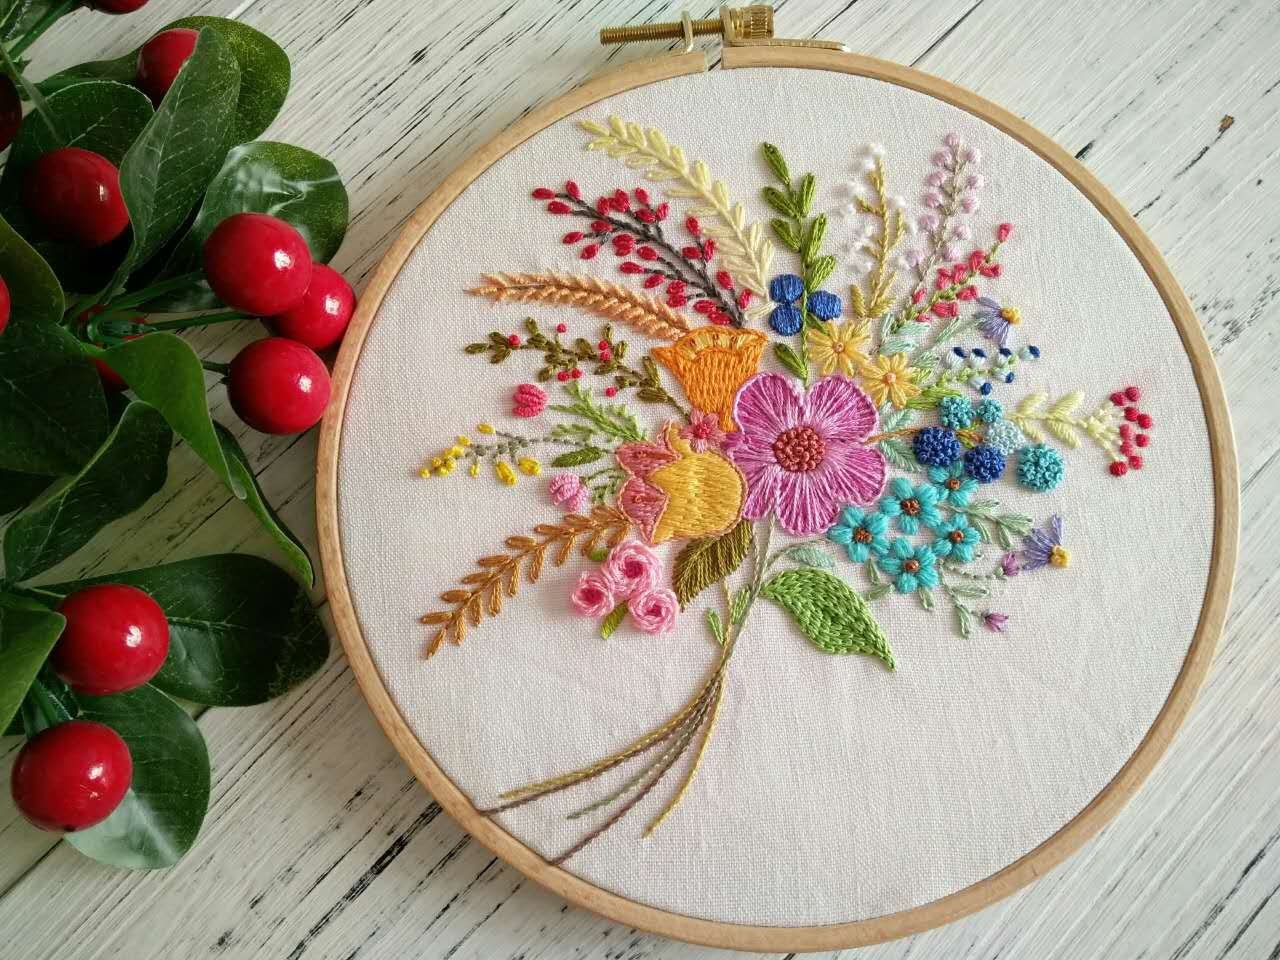 FLOWER MINI Punch Needle Embroidery Kit BEGINNER Craft Kit Quality Supplies  Included Handmade Flower Woodland Aesthetic Wall Art 